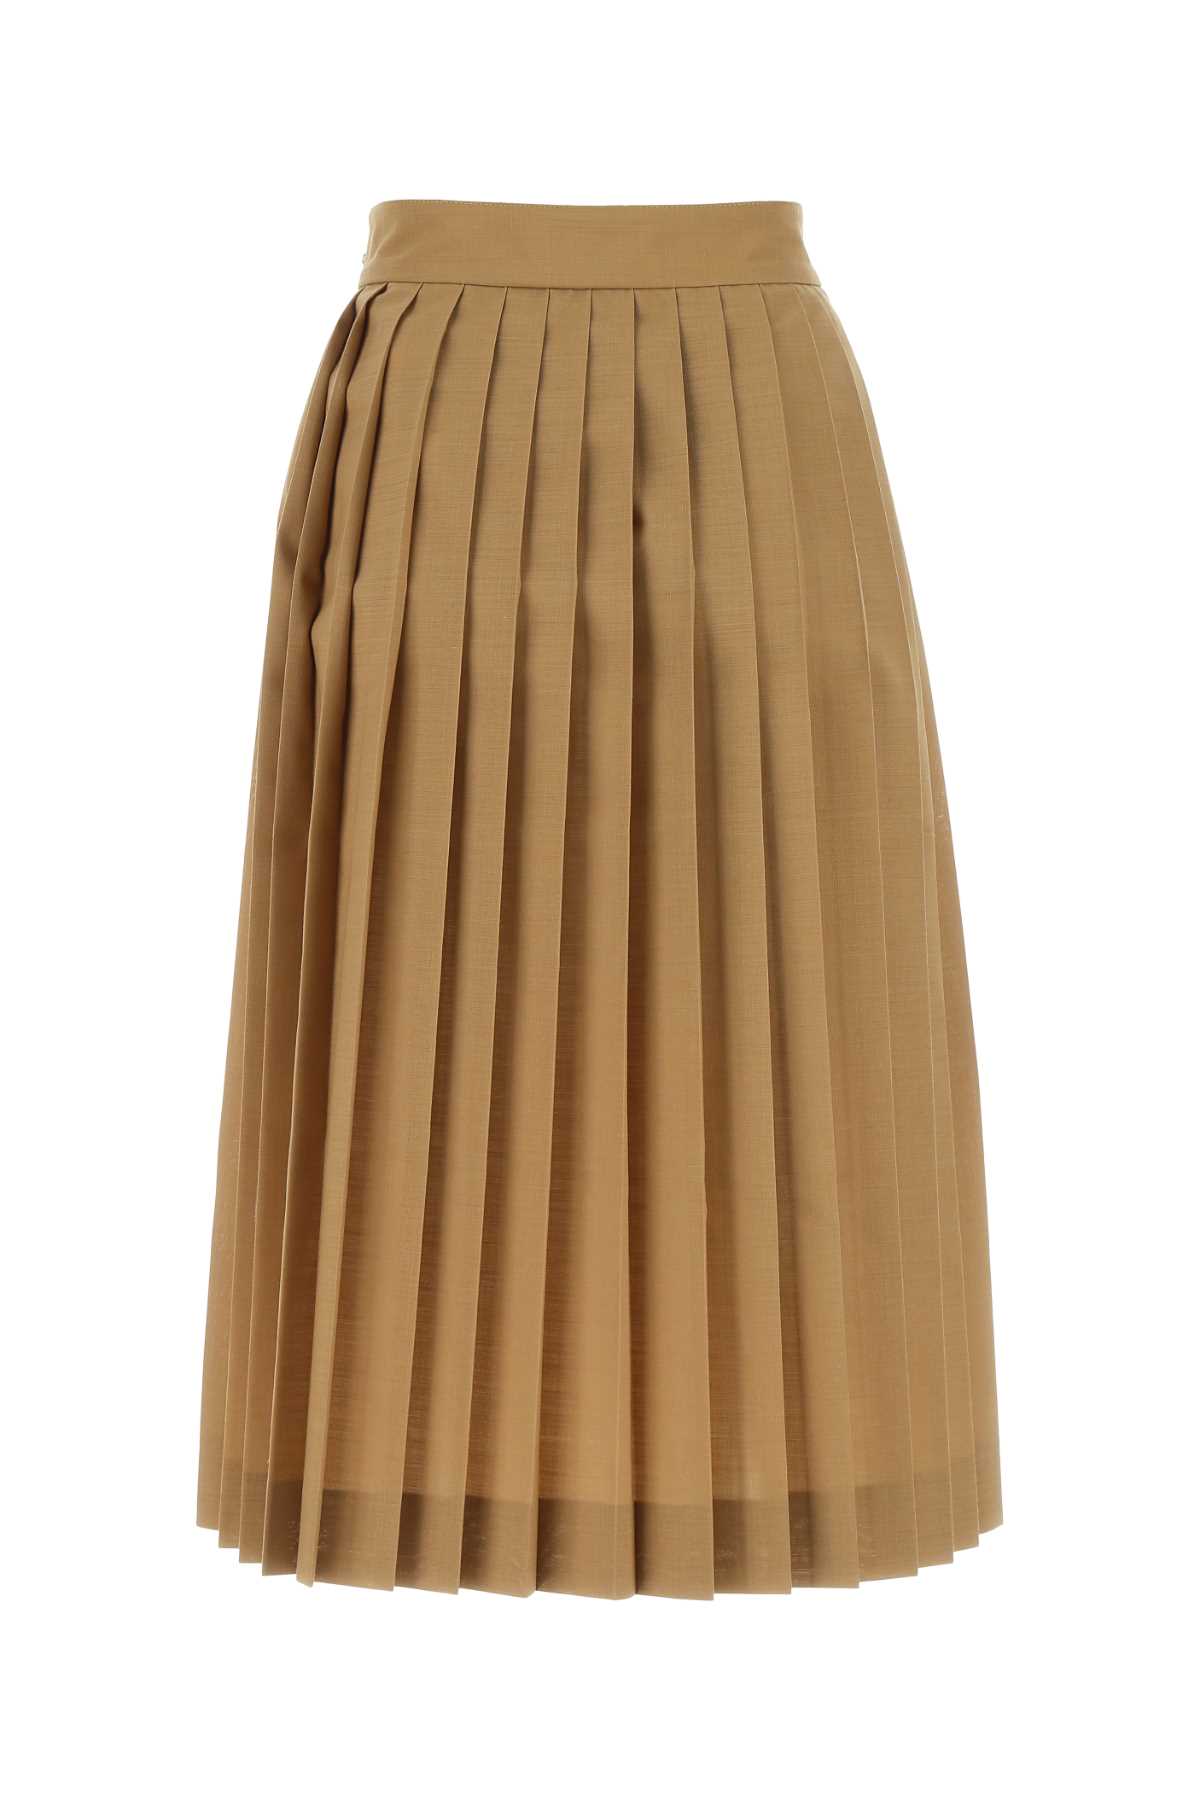 Quira Biscuit Polyester Blend Skirt In Q0024